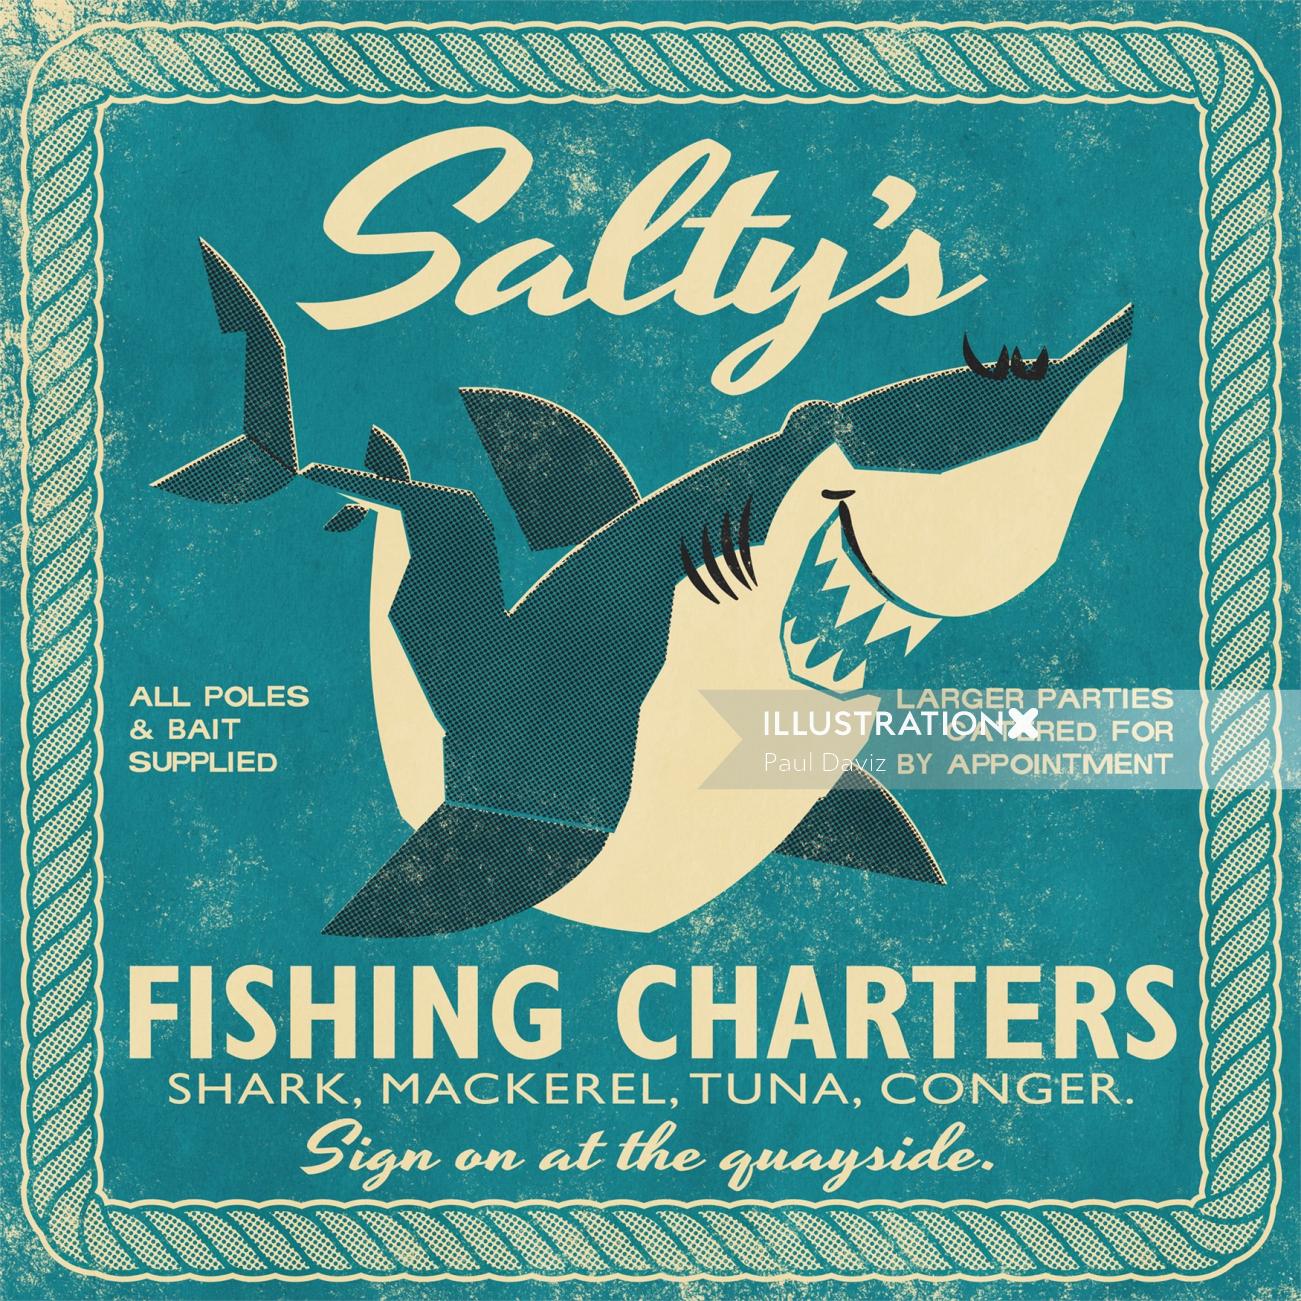 Retro Salty's Fishing Charter Poster for Open Road
